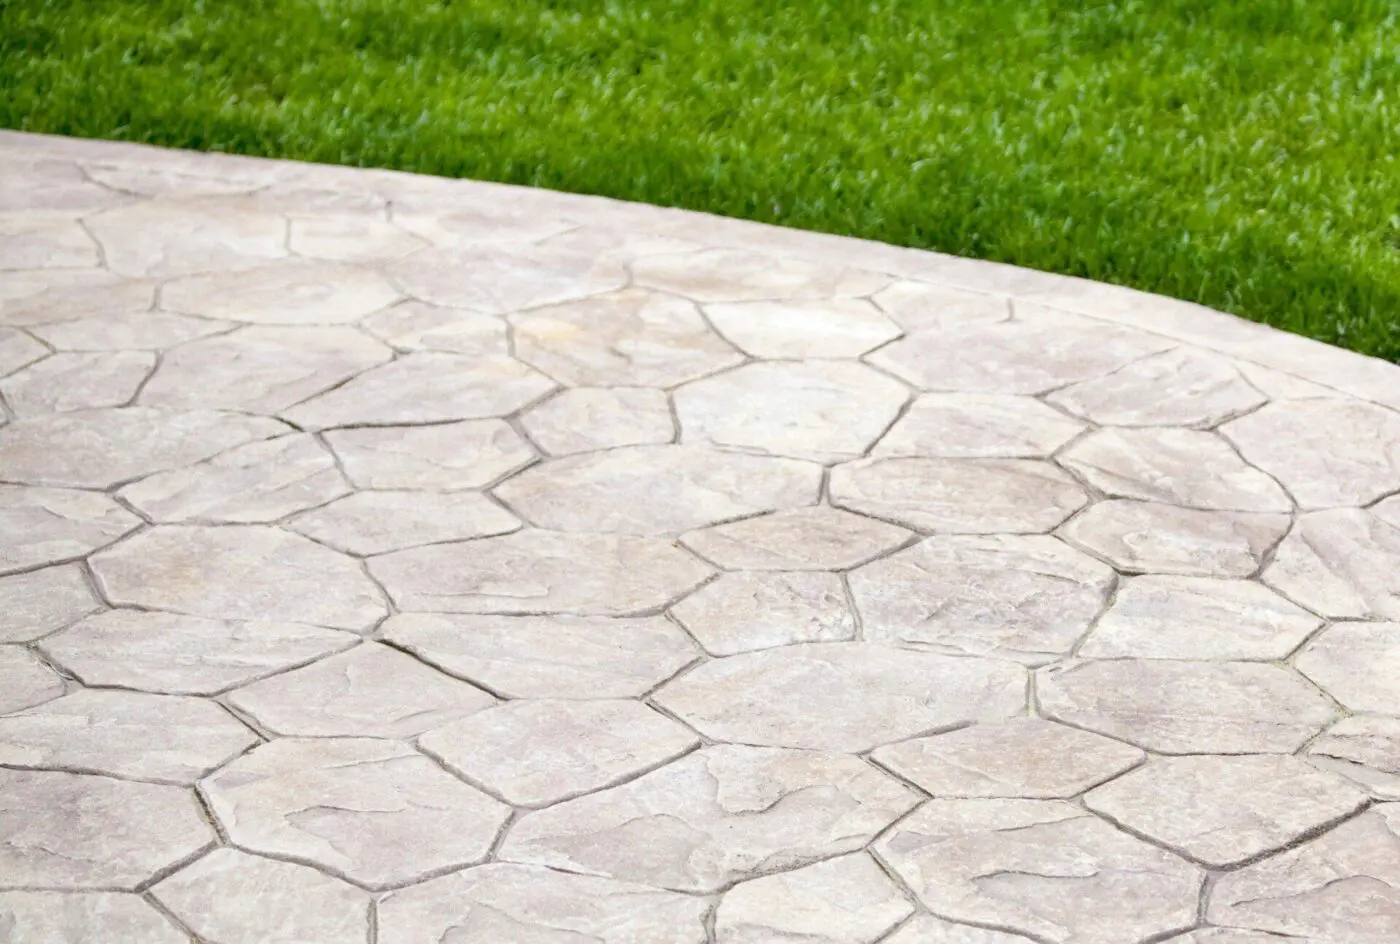 A close-up of a decorative concrete walkway featuring irregularly shaped stones in a light color. The walkway curves to the right and is bordered by a neatly trimmed, lush green lawn, showcasing the craftsmanship of skilled contractors.